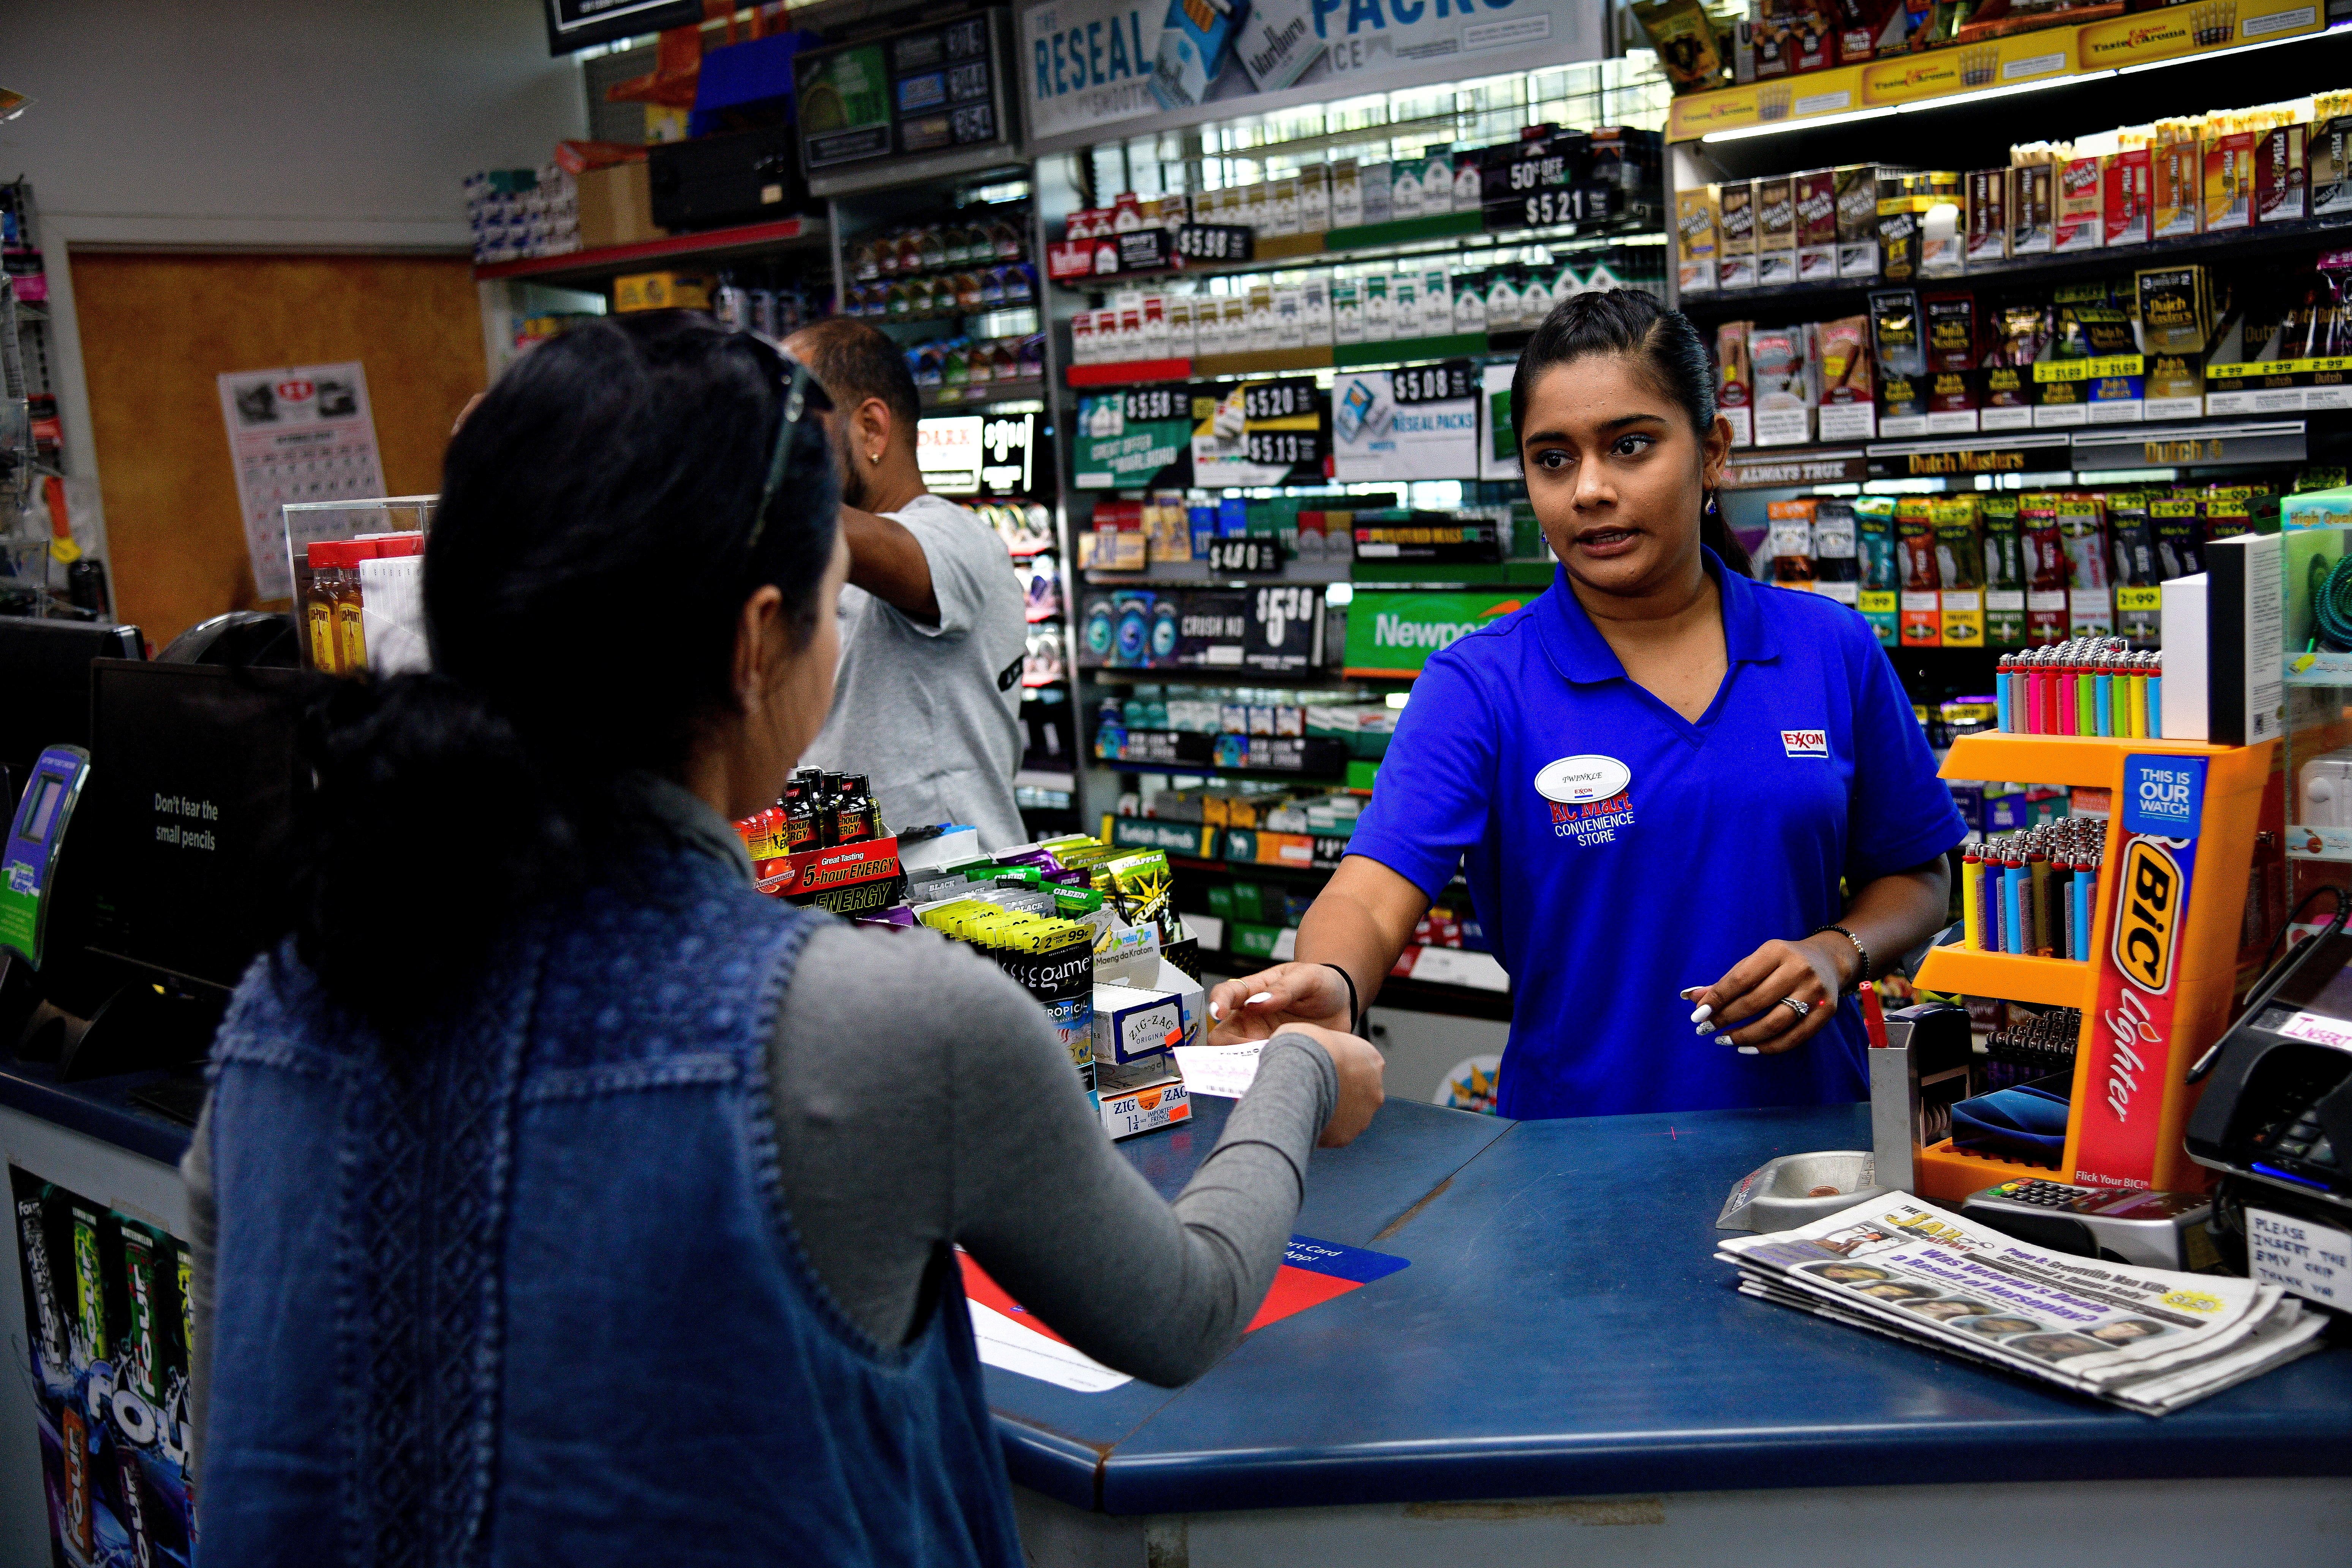 Twinkle Patel sells a Powerball ticket at the KC Mart in Simpsonville, South Carolina, U.S. October 24, 2018. REUTERS/Charles Mostoller